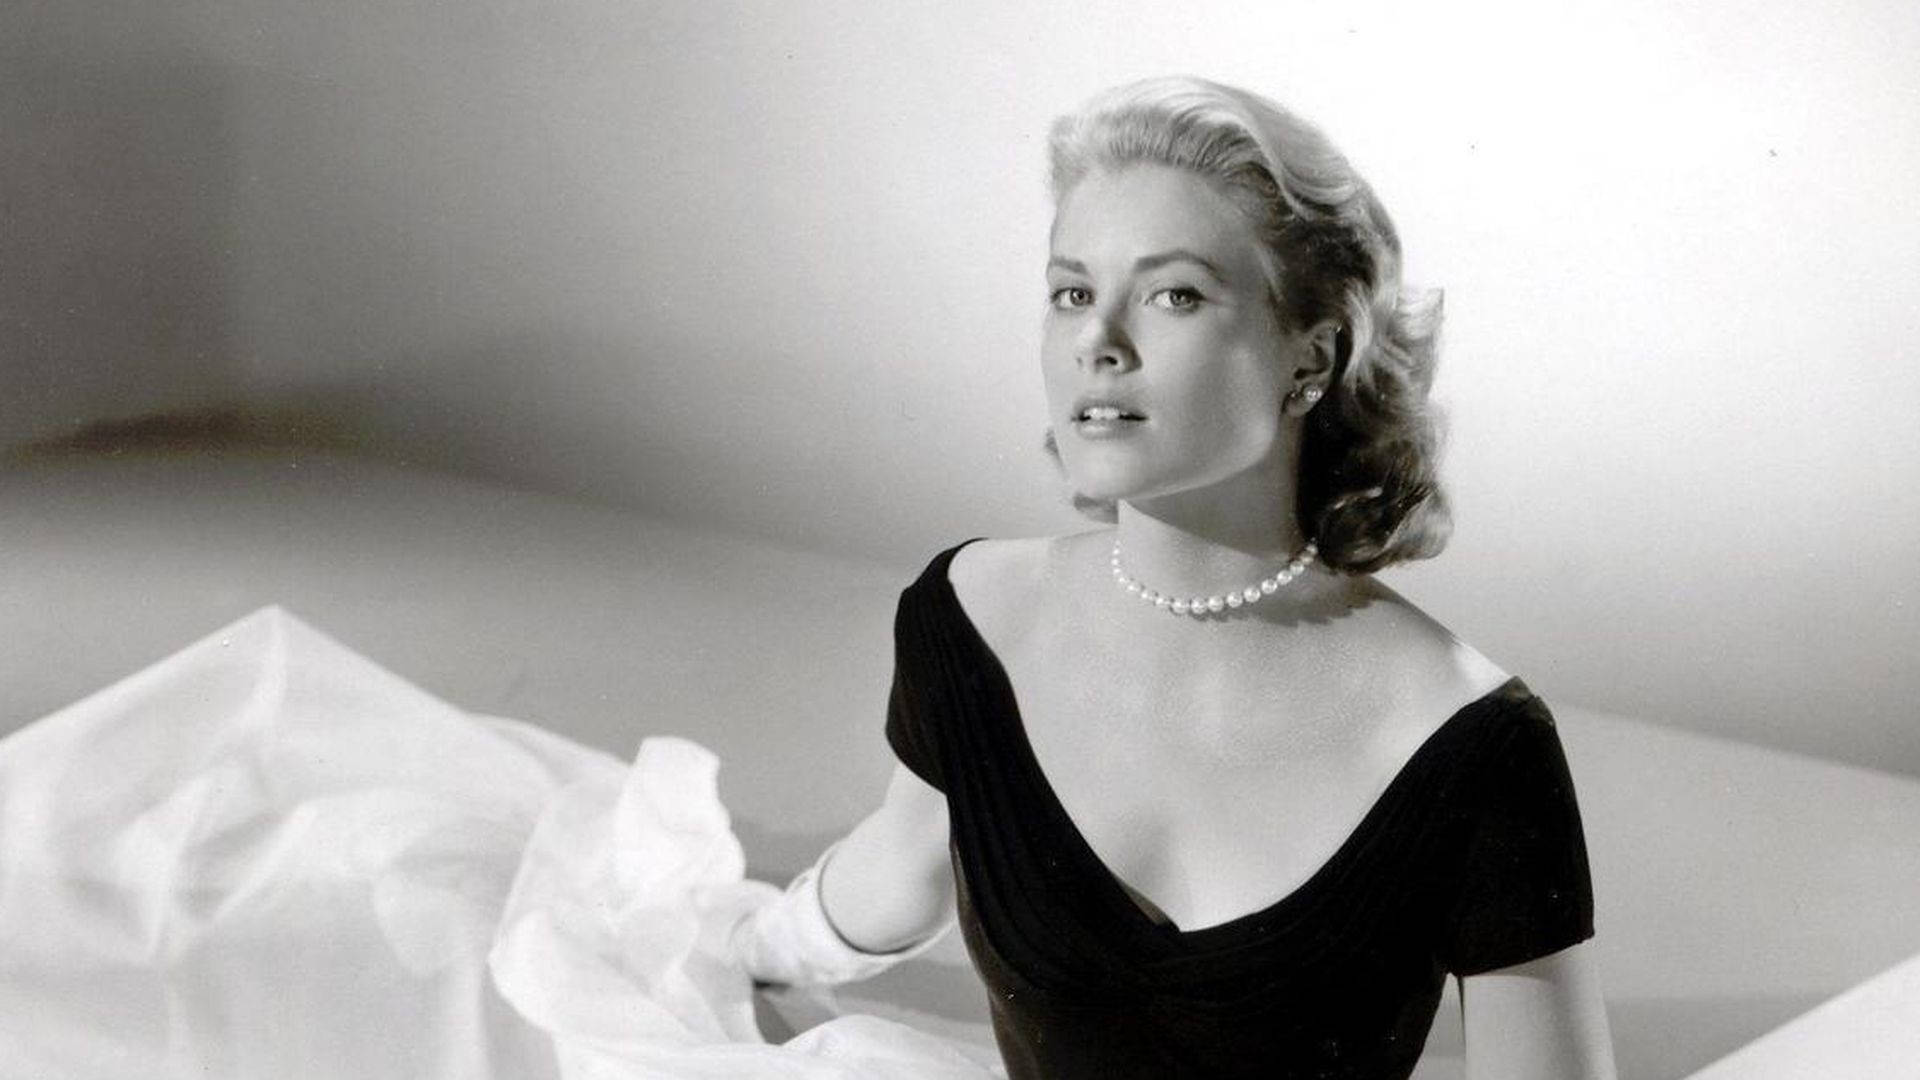 Kinostar Grace Kelly (for A Computer Or Mobile Wallpaper Featuring An Image Of The Actress Grace Kelly From Her Days As A Hollywood Starlet) Wallpaper